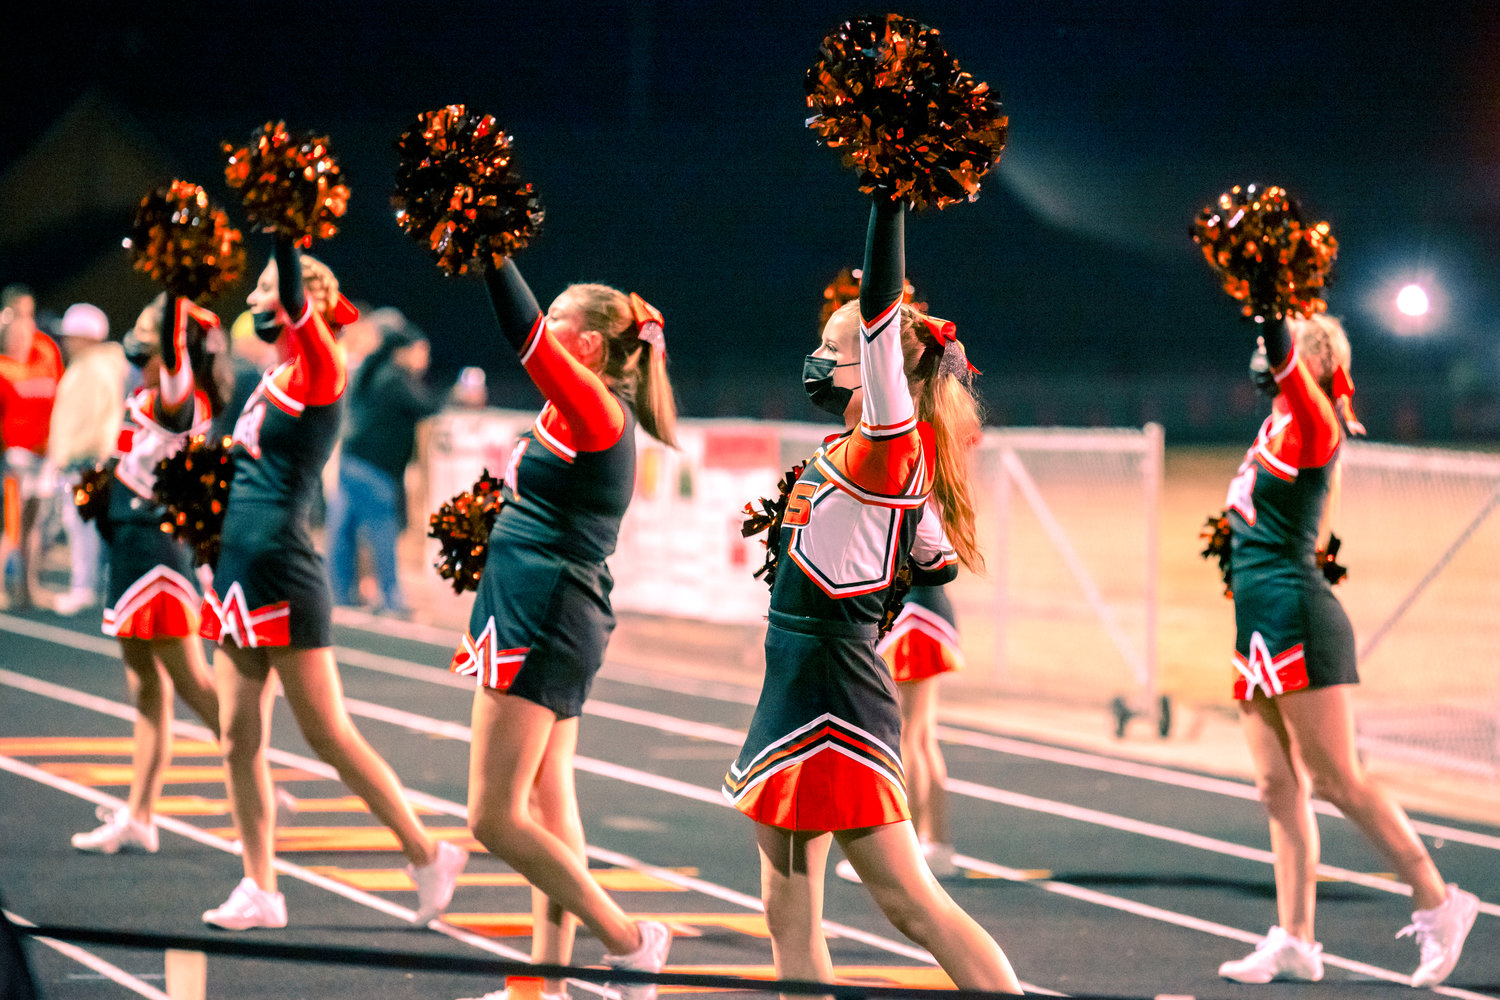 Members of the Rainier High School Cheerleading Team raise their pom-poms during a game Friday night.